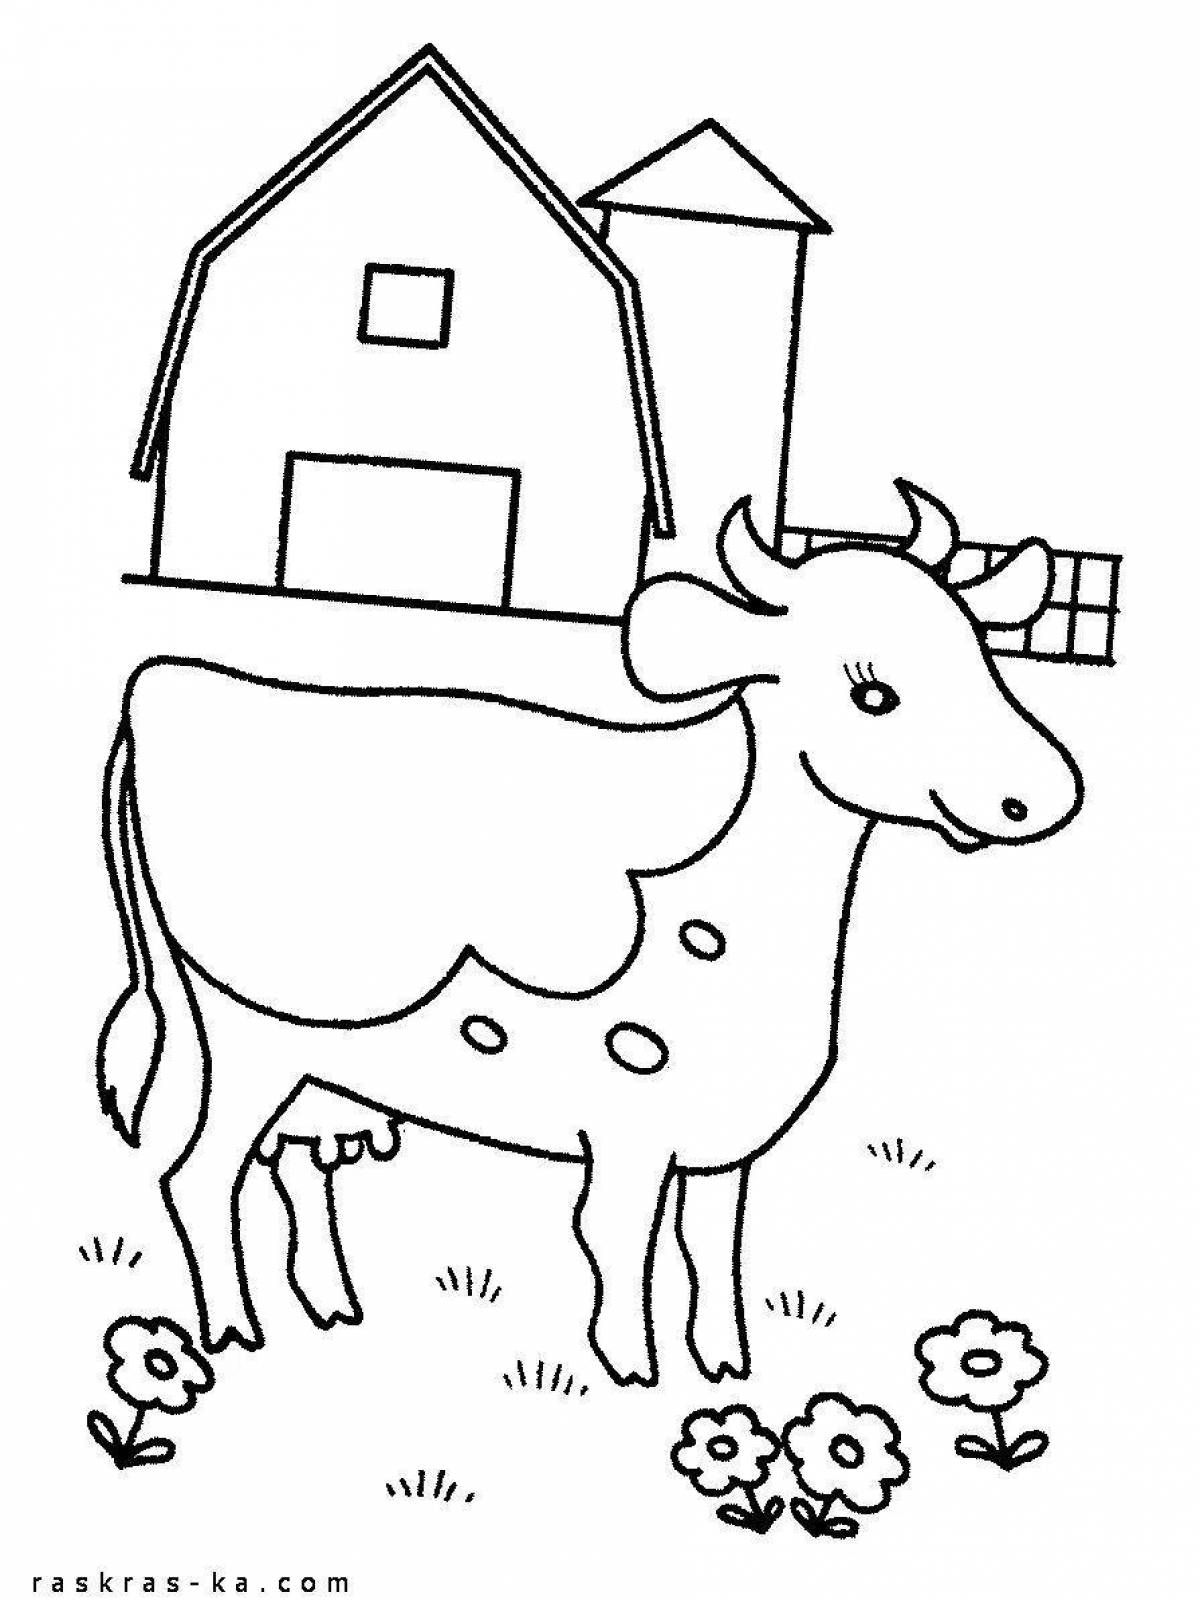 Playful country house coloring page for kids